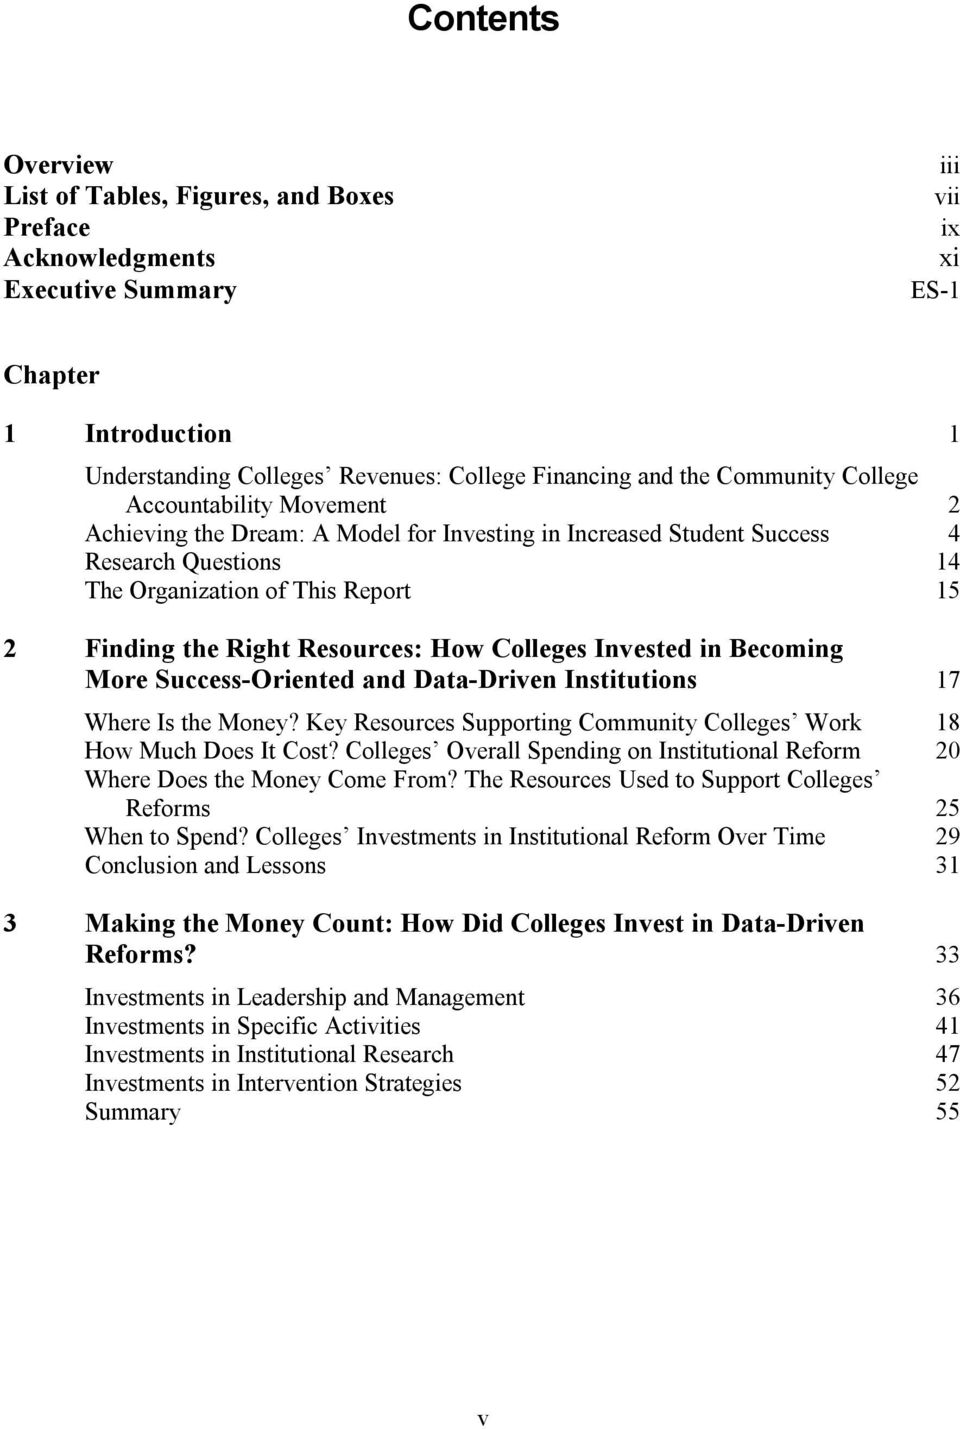 Resources: How Colleges Invested in Becoming More Success-Oriented and Data-Driven Institutions 17 Where Is the Money? Key Resources Supporting Community Colleges Work 18 How Much Does It Cost?